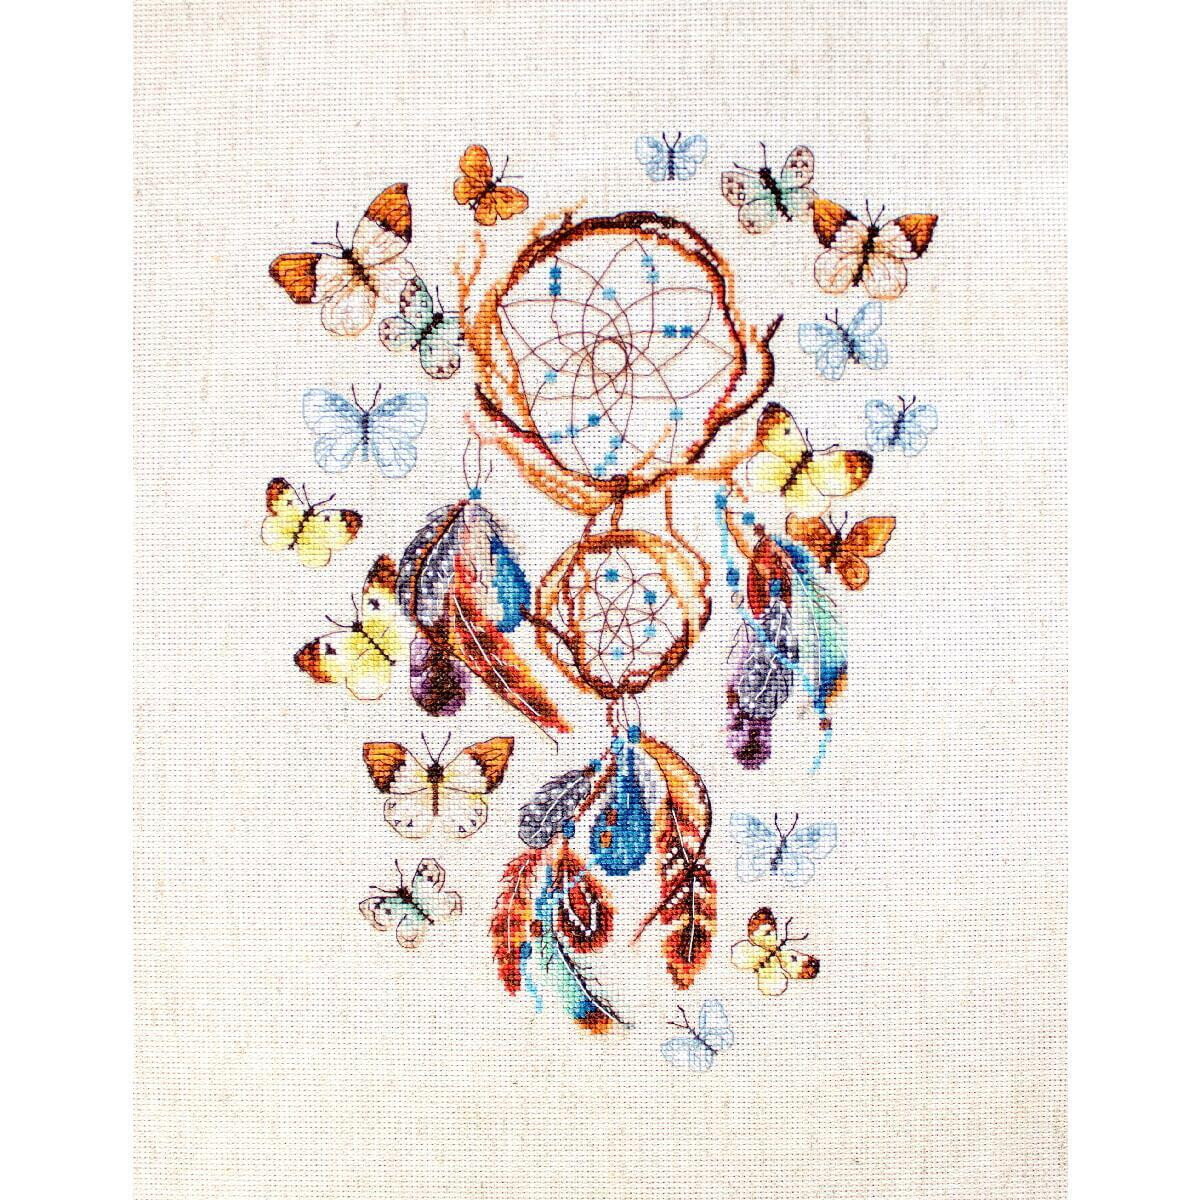 A colorful cross stitch pack with a dreamcatcher...